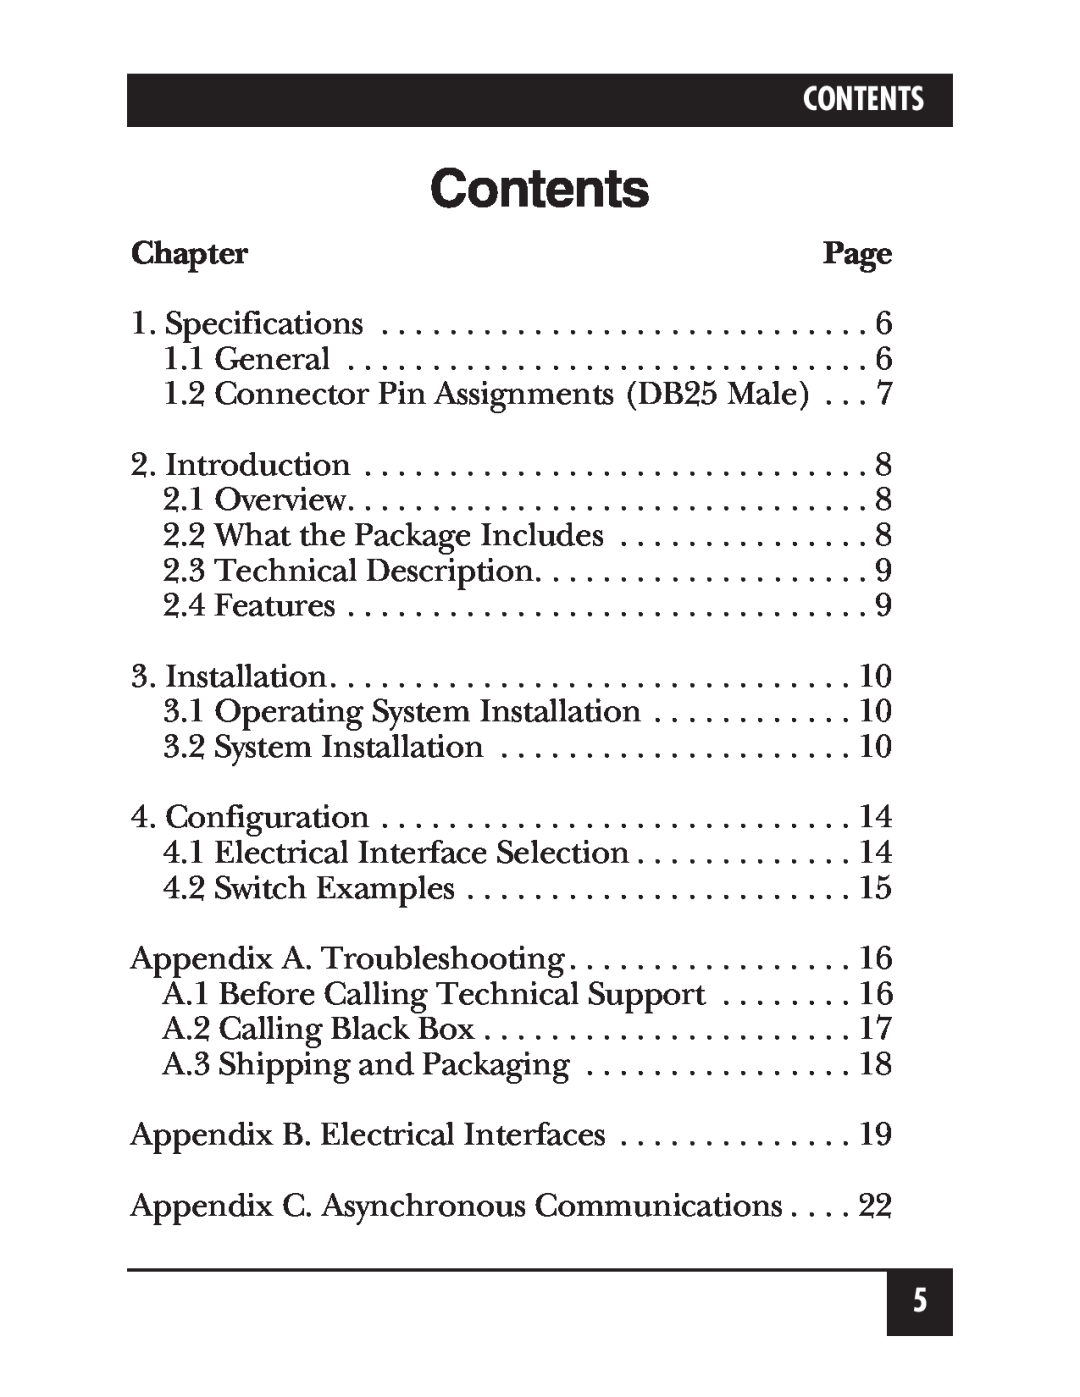 Black Box IC266A manual Contents, Chapter 